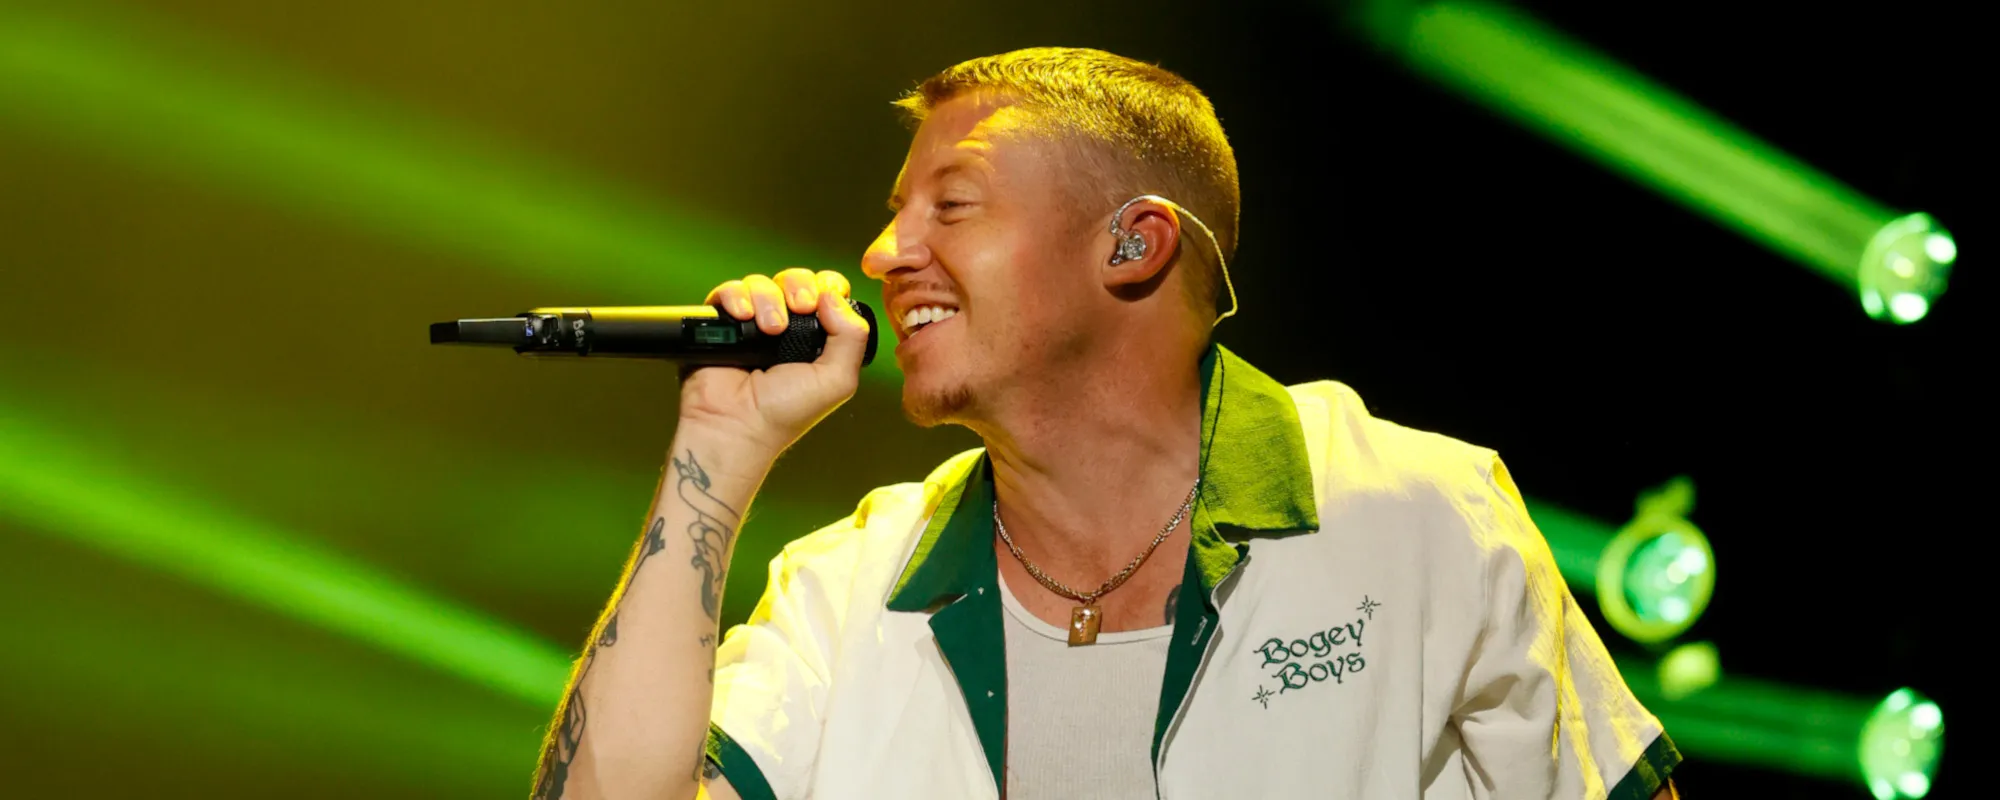 Macklemore Teases New Music with “Chant”